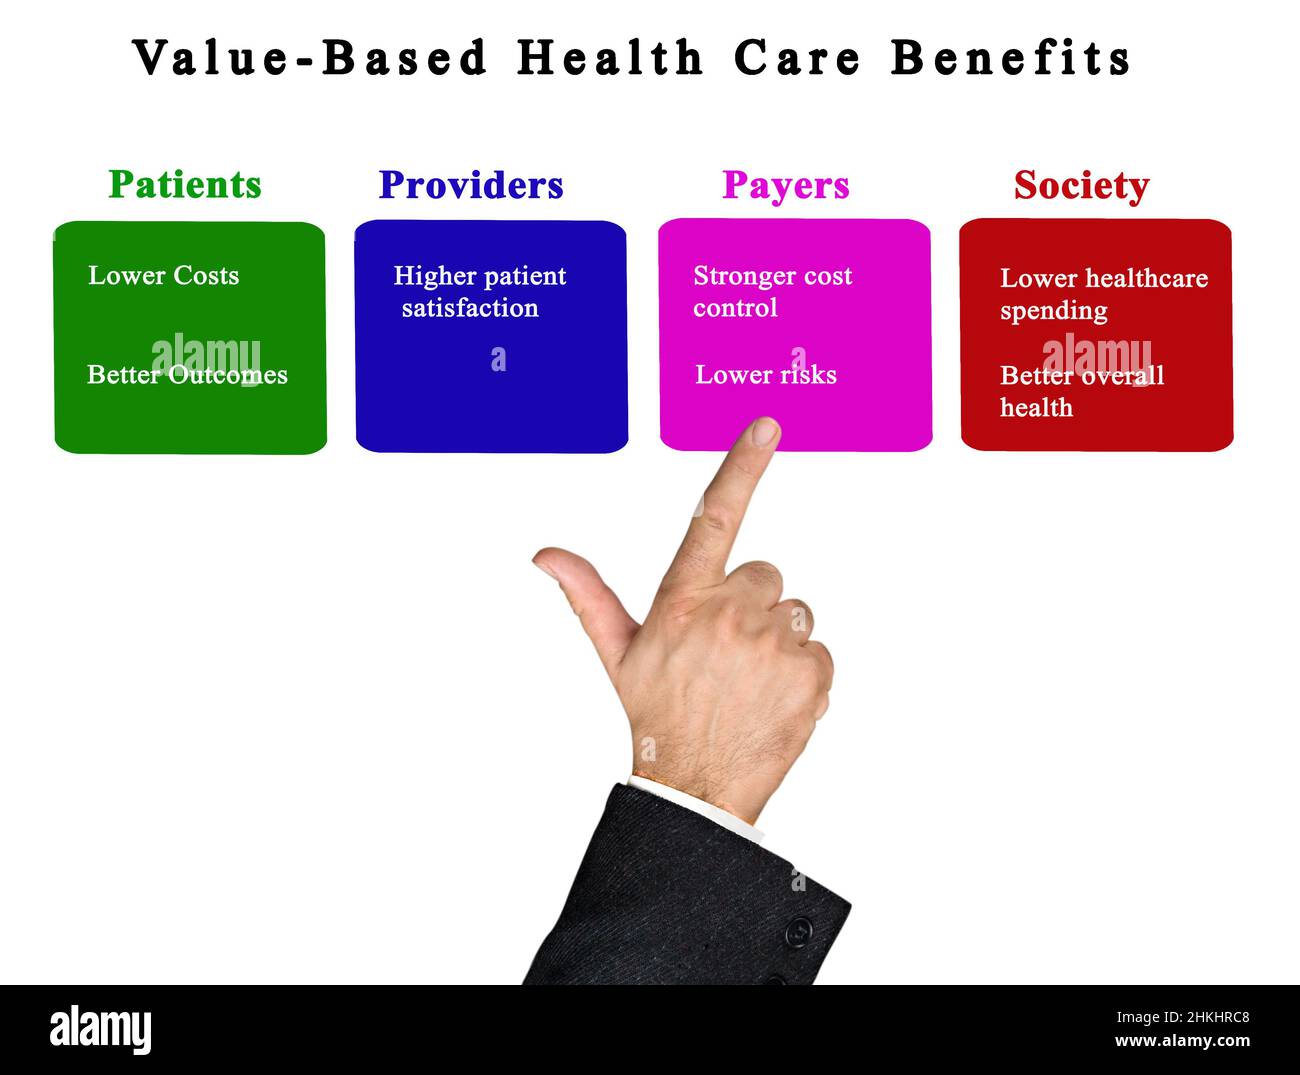 benefits of value based care